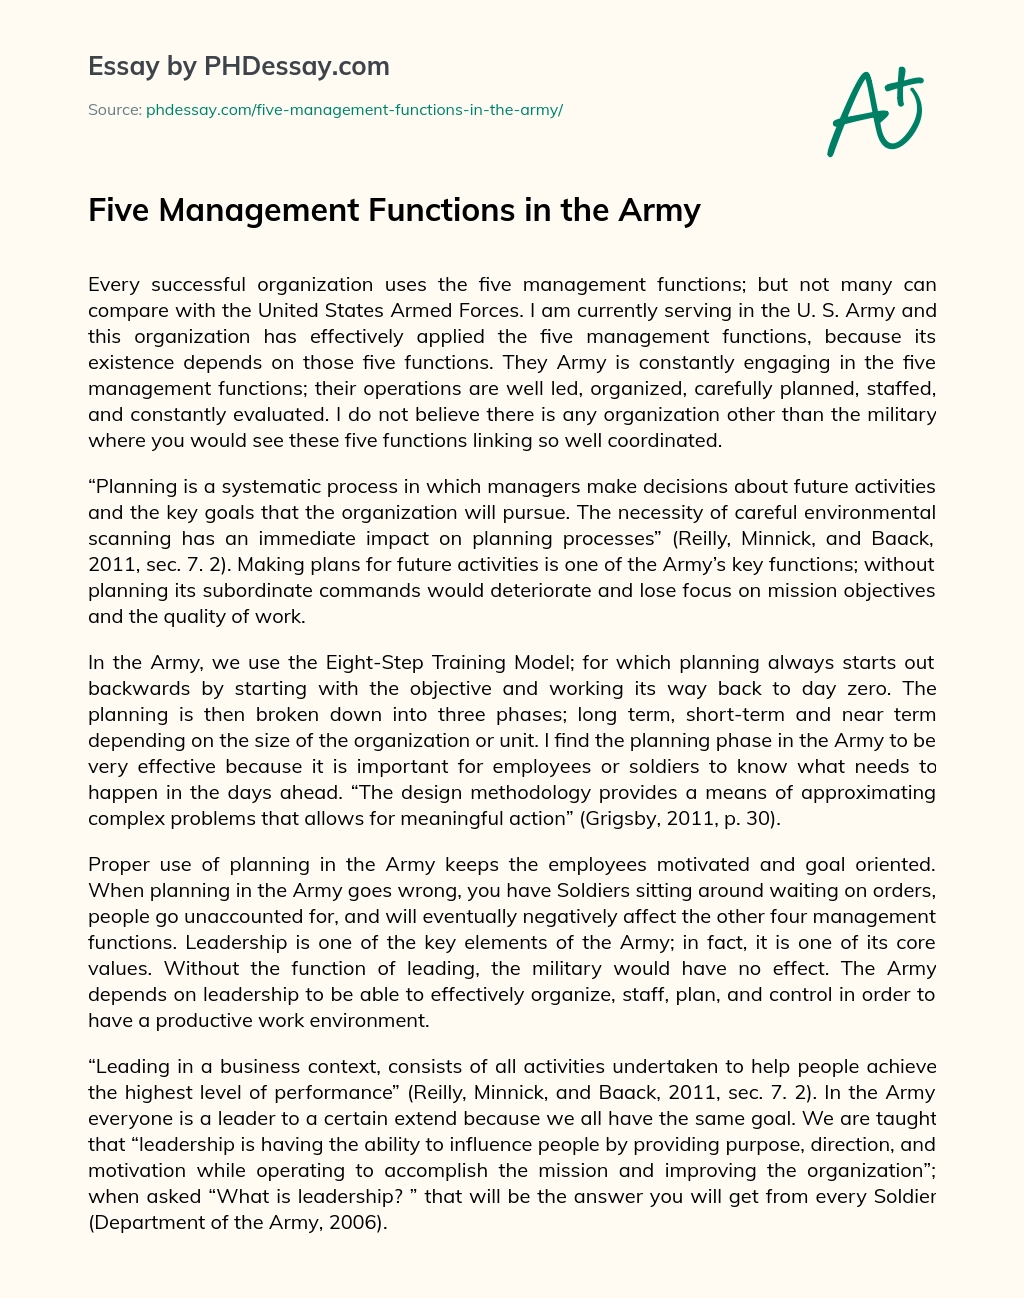 Five Management Functions in the Army essay